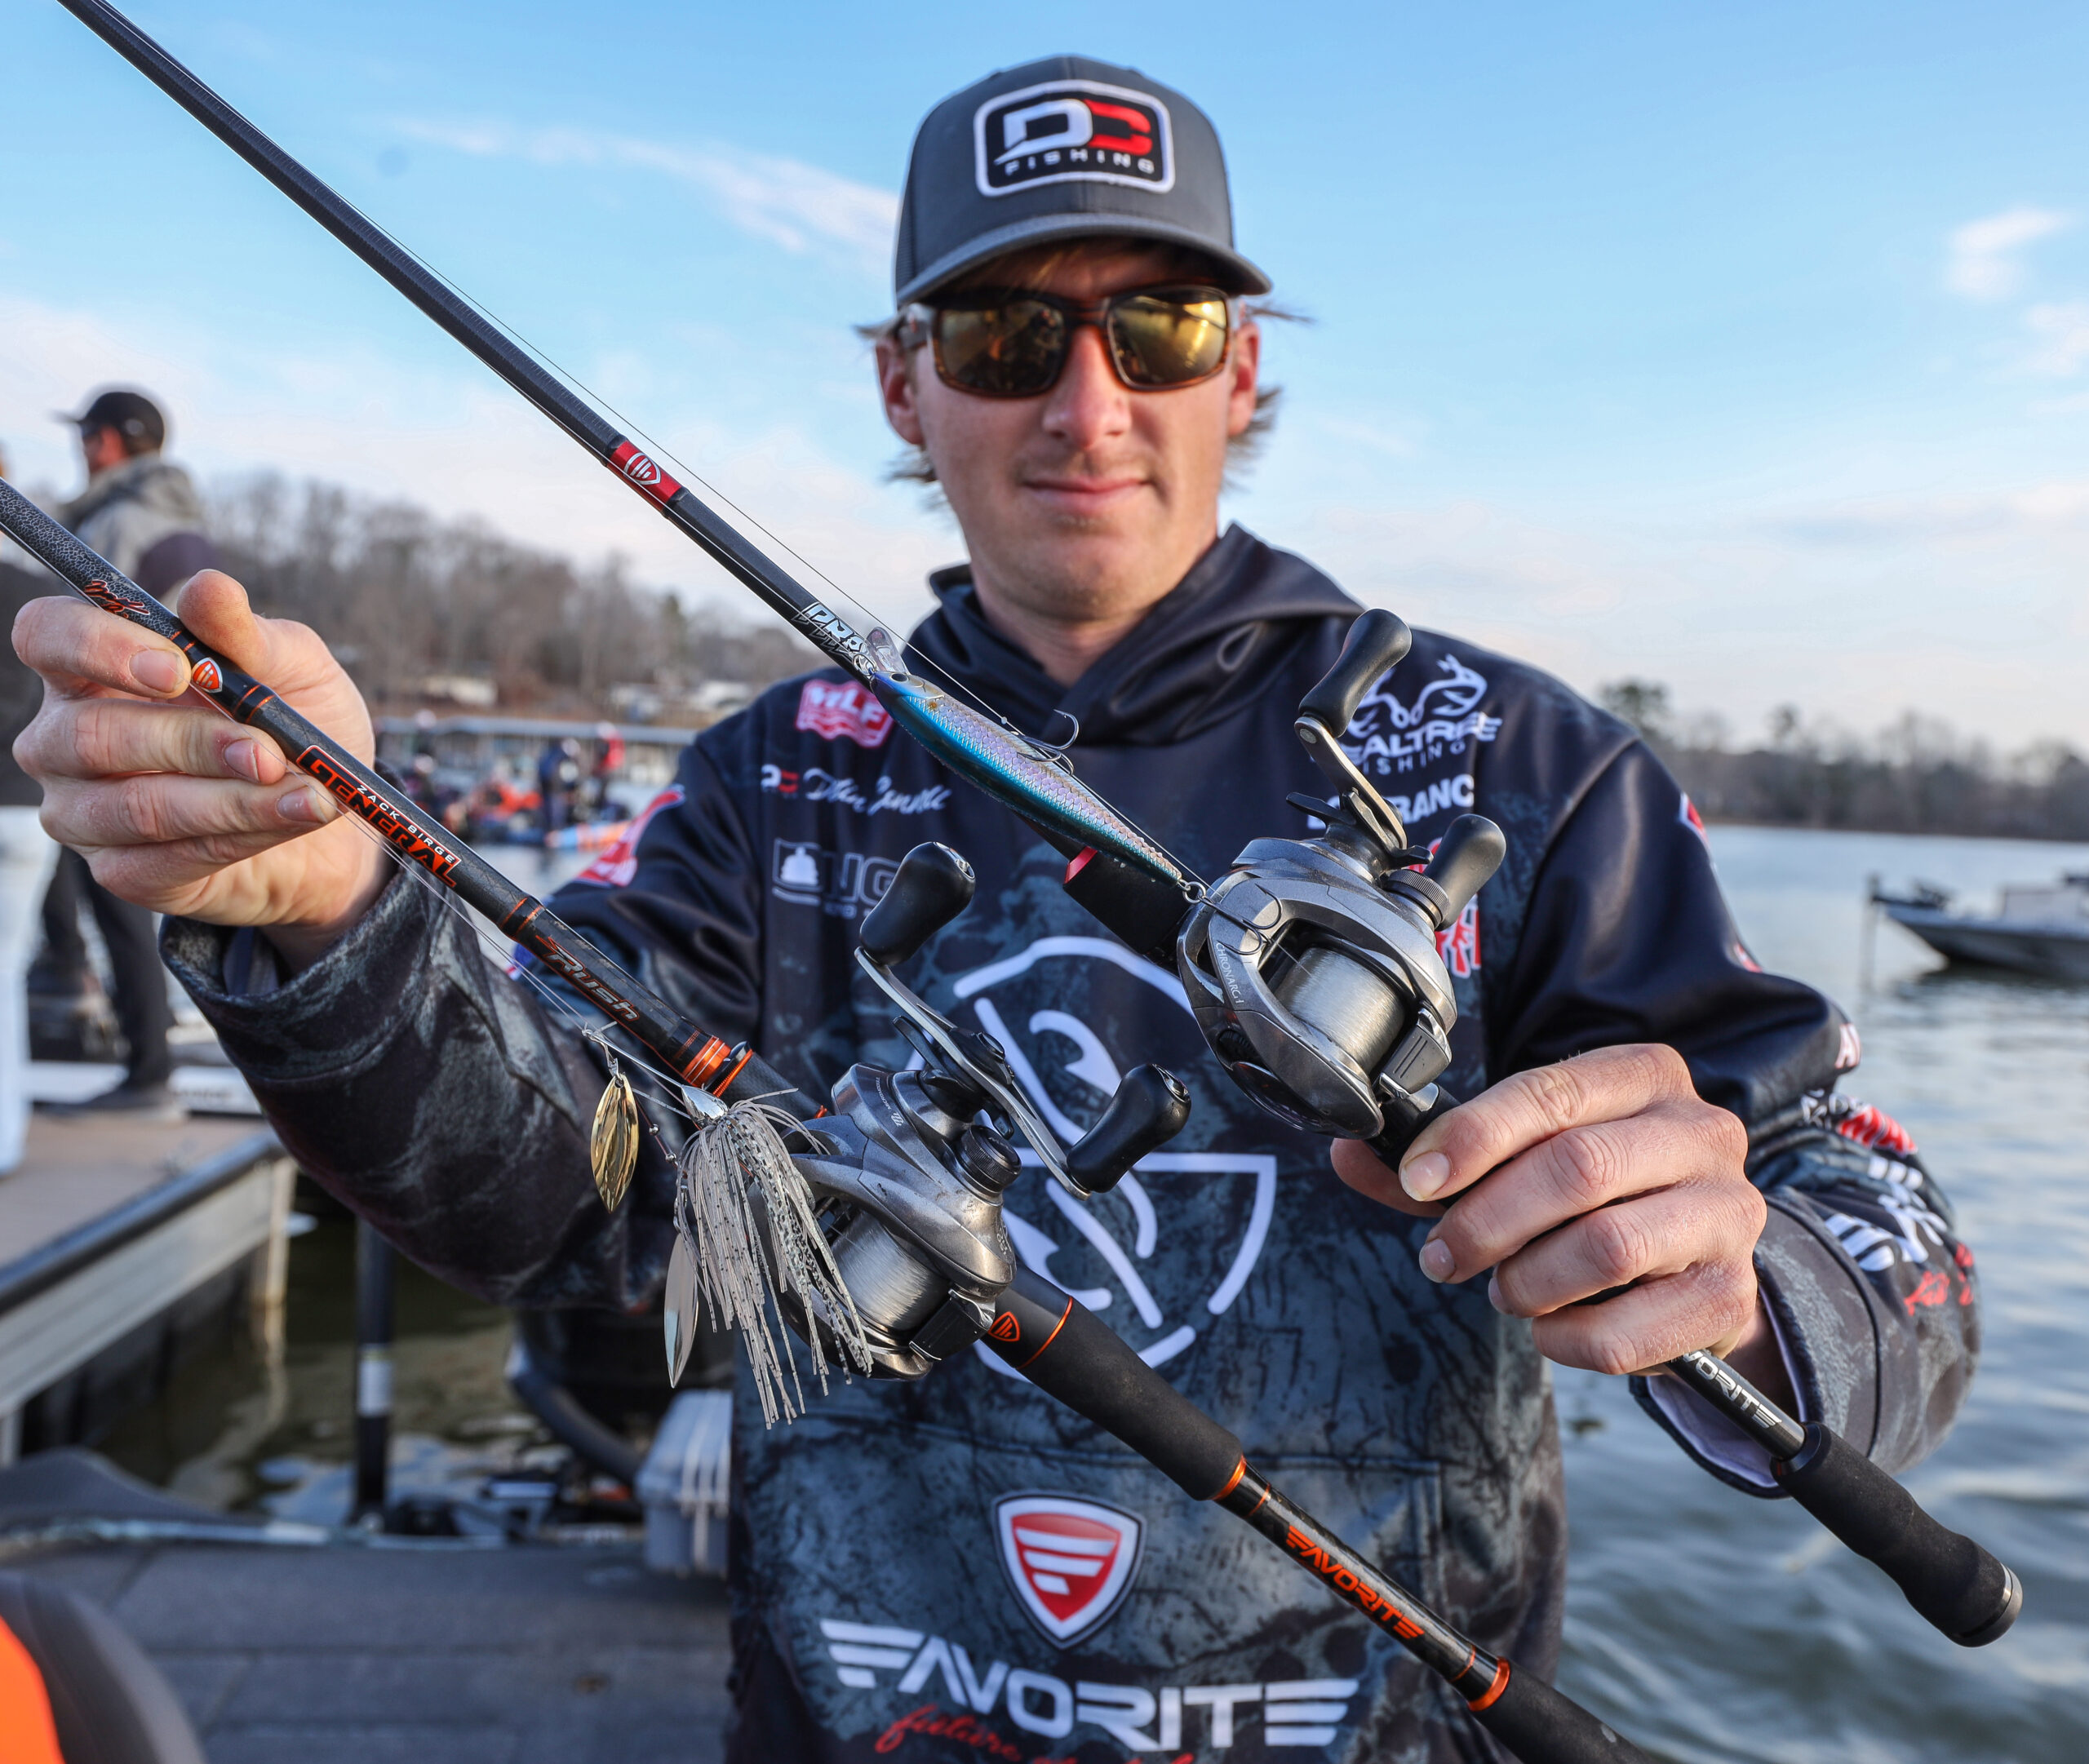 Spotted Bass 101 with Favorite Pro Dustin Connell - Major League Fishing